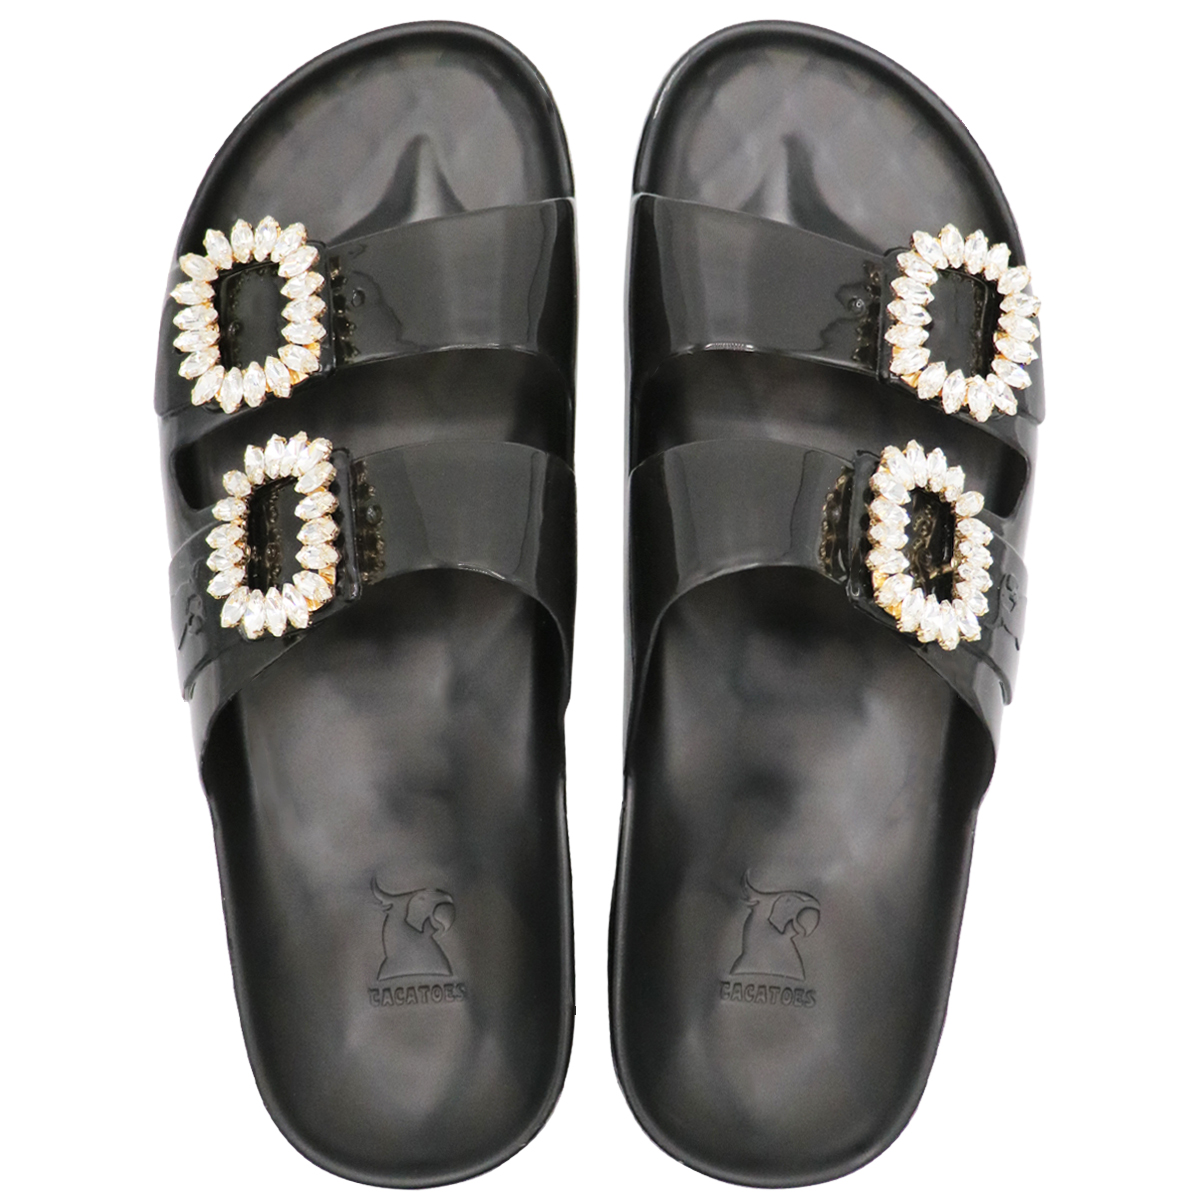 CACATOES ANJO LINDO SLIPPERS